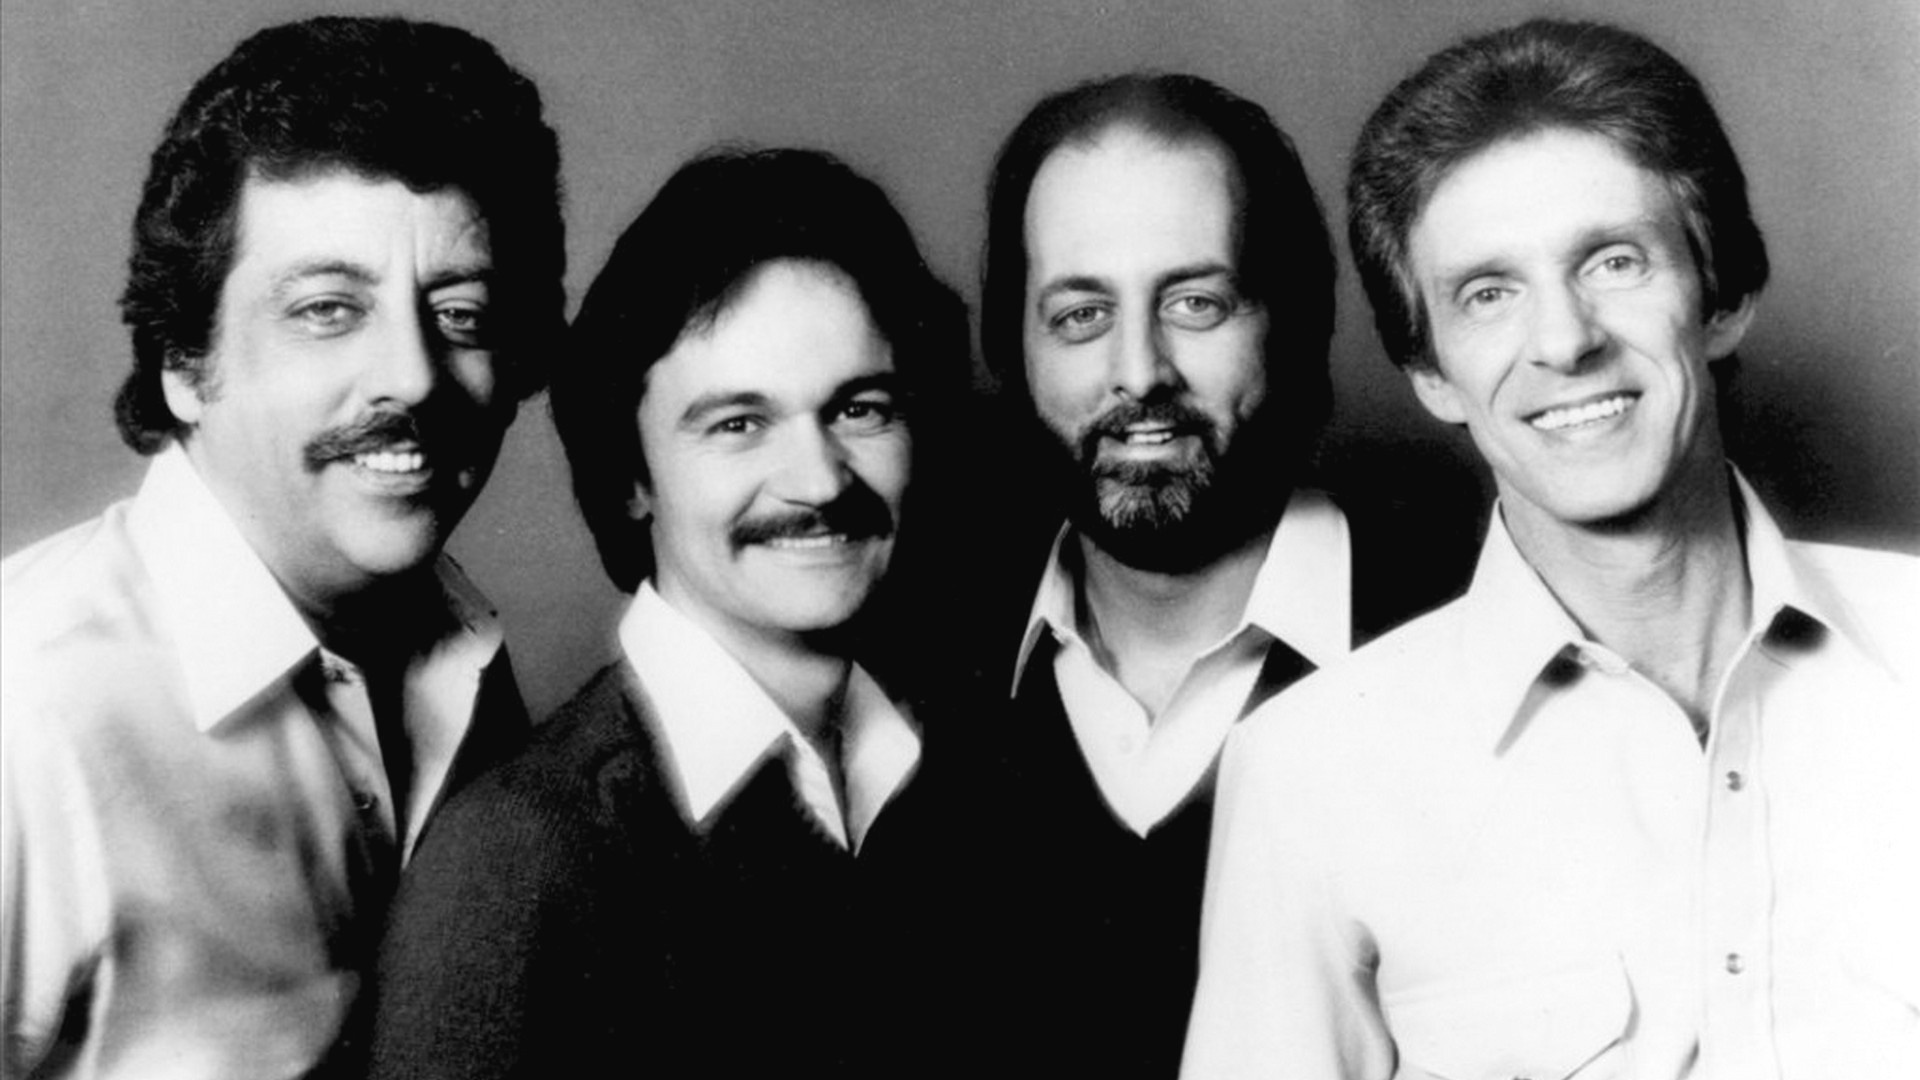 The Statler Brothers, Country music fanart, Emotional expressions, Musical appreciation, 1920x1080 Full HD Desktop